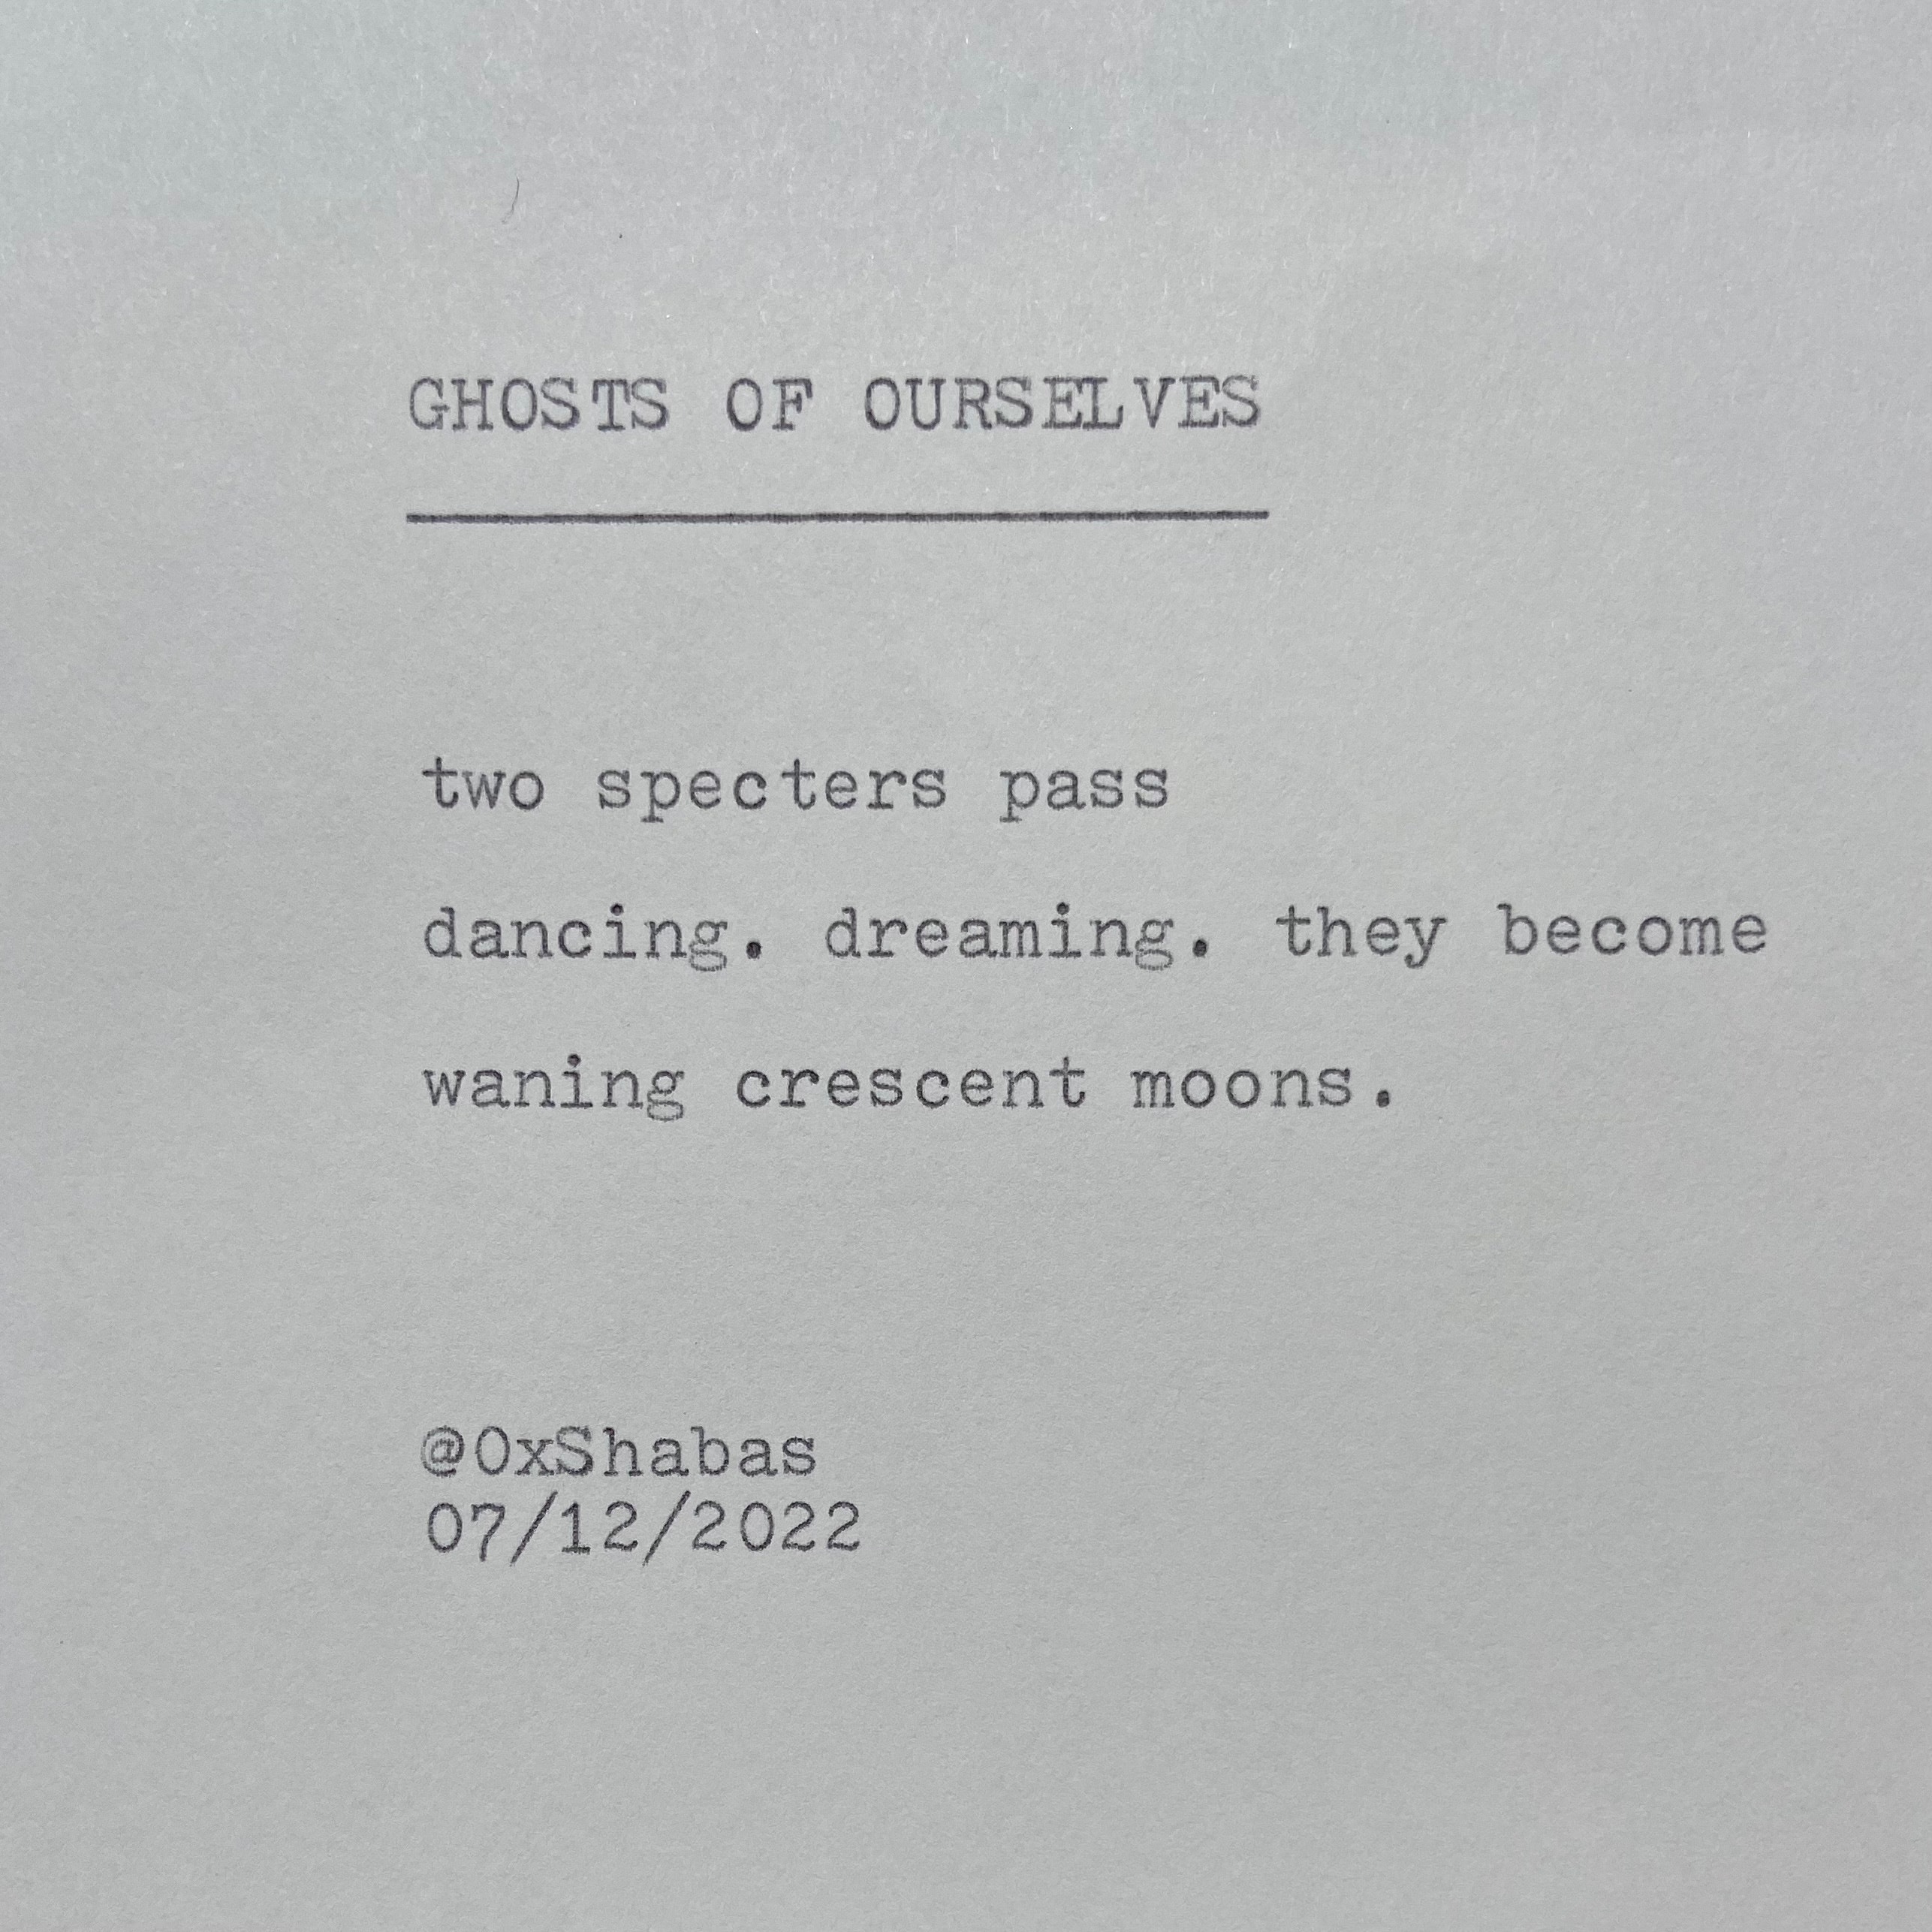 Ghosts of Ourselves